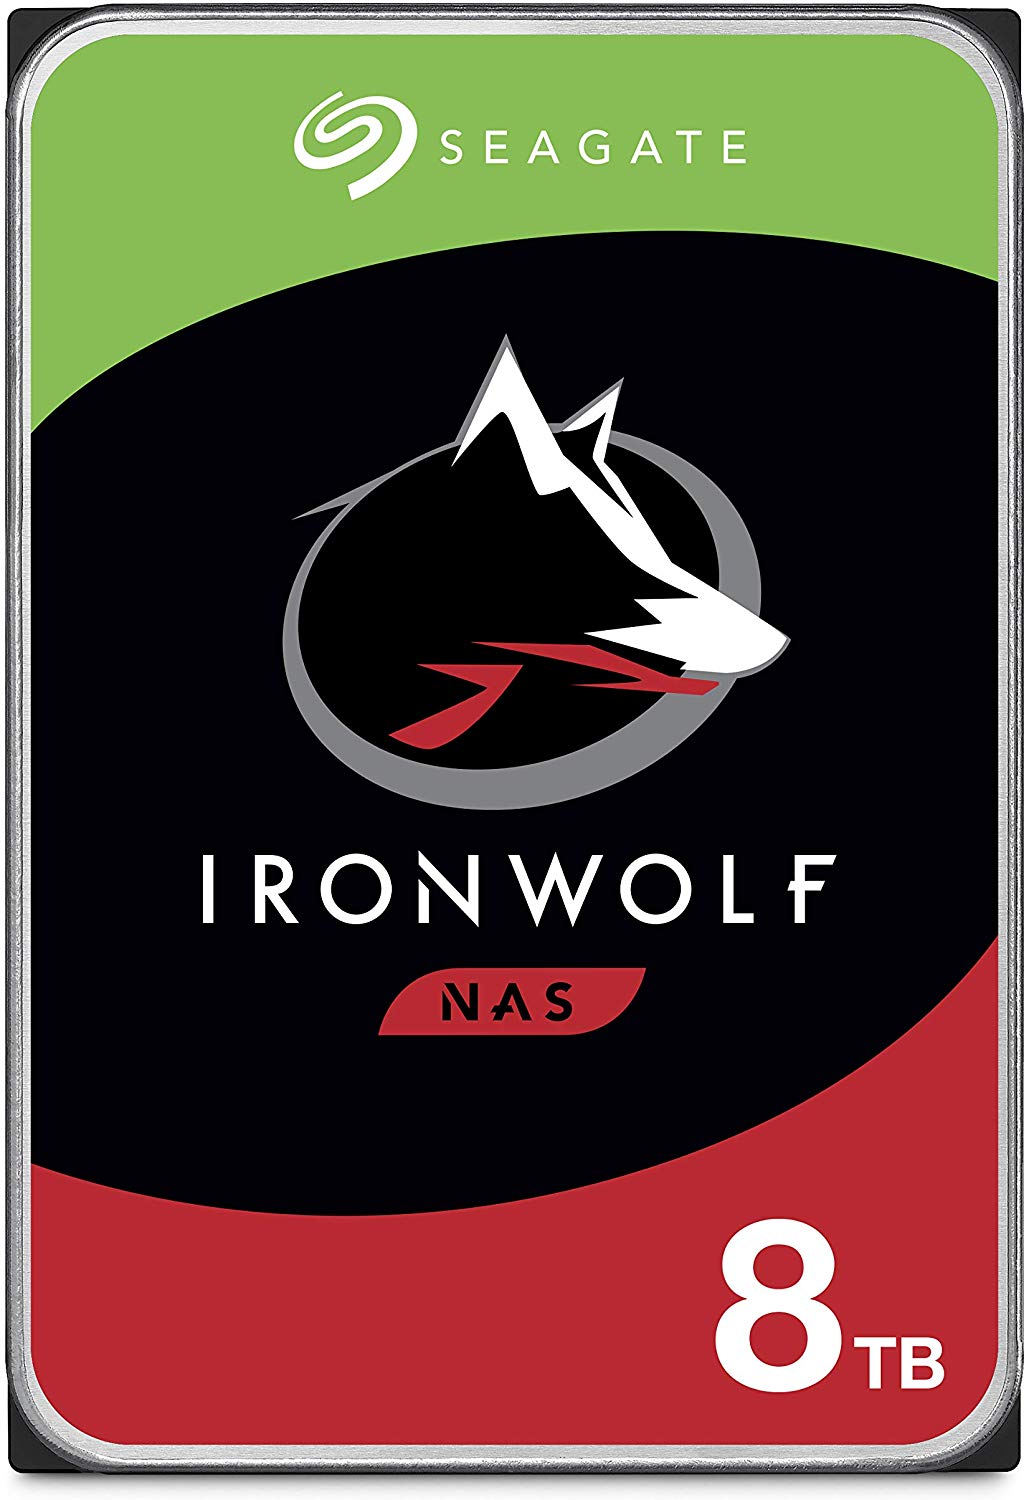 SEAGATE IRONWOLF 8 TB 7200RPM 256MB SATA3 256MB 180TB/Y NAS (ST8000VN004)